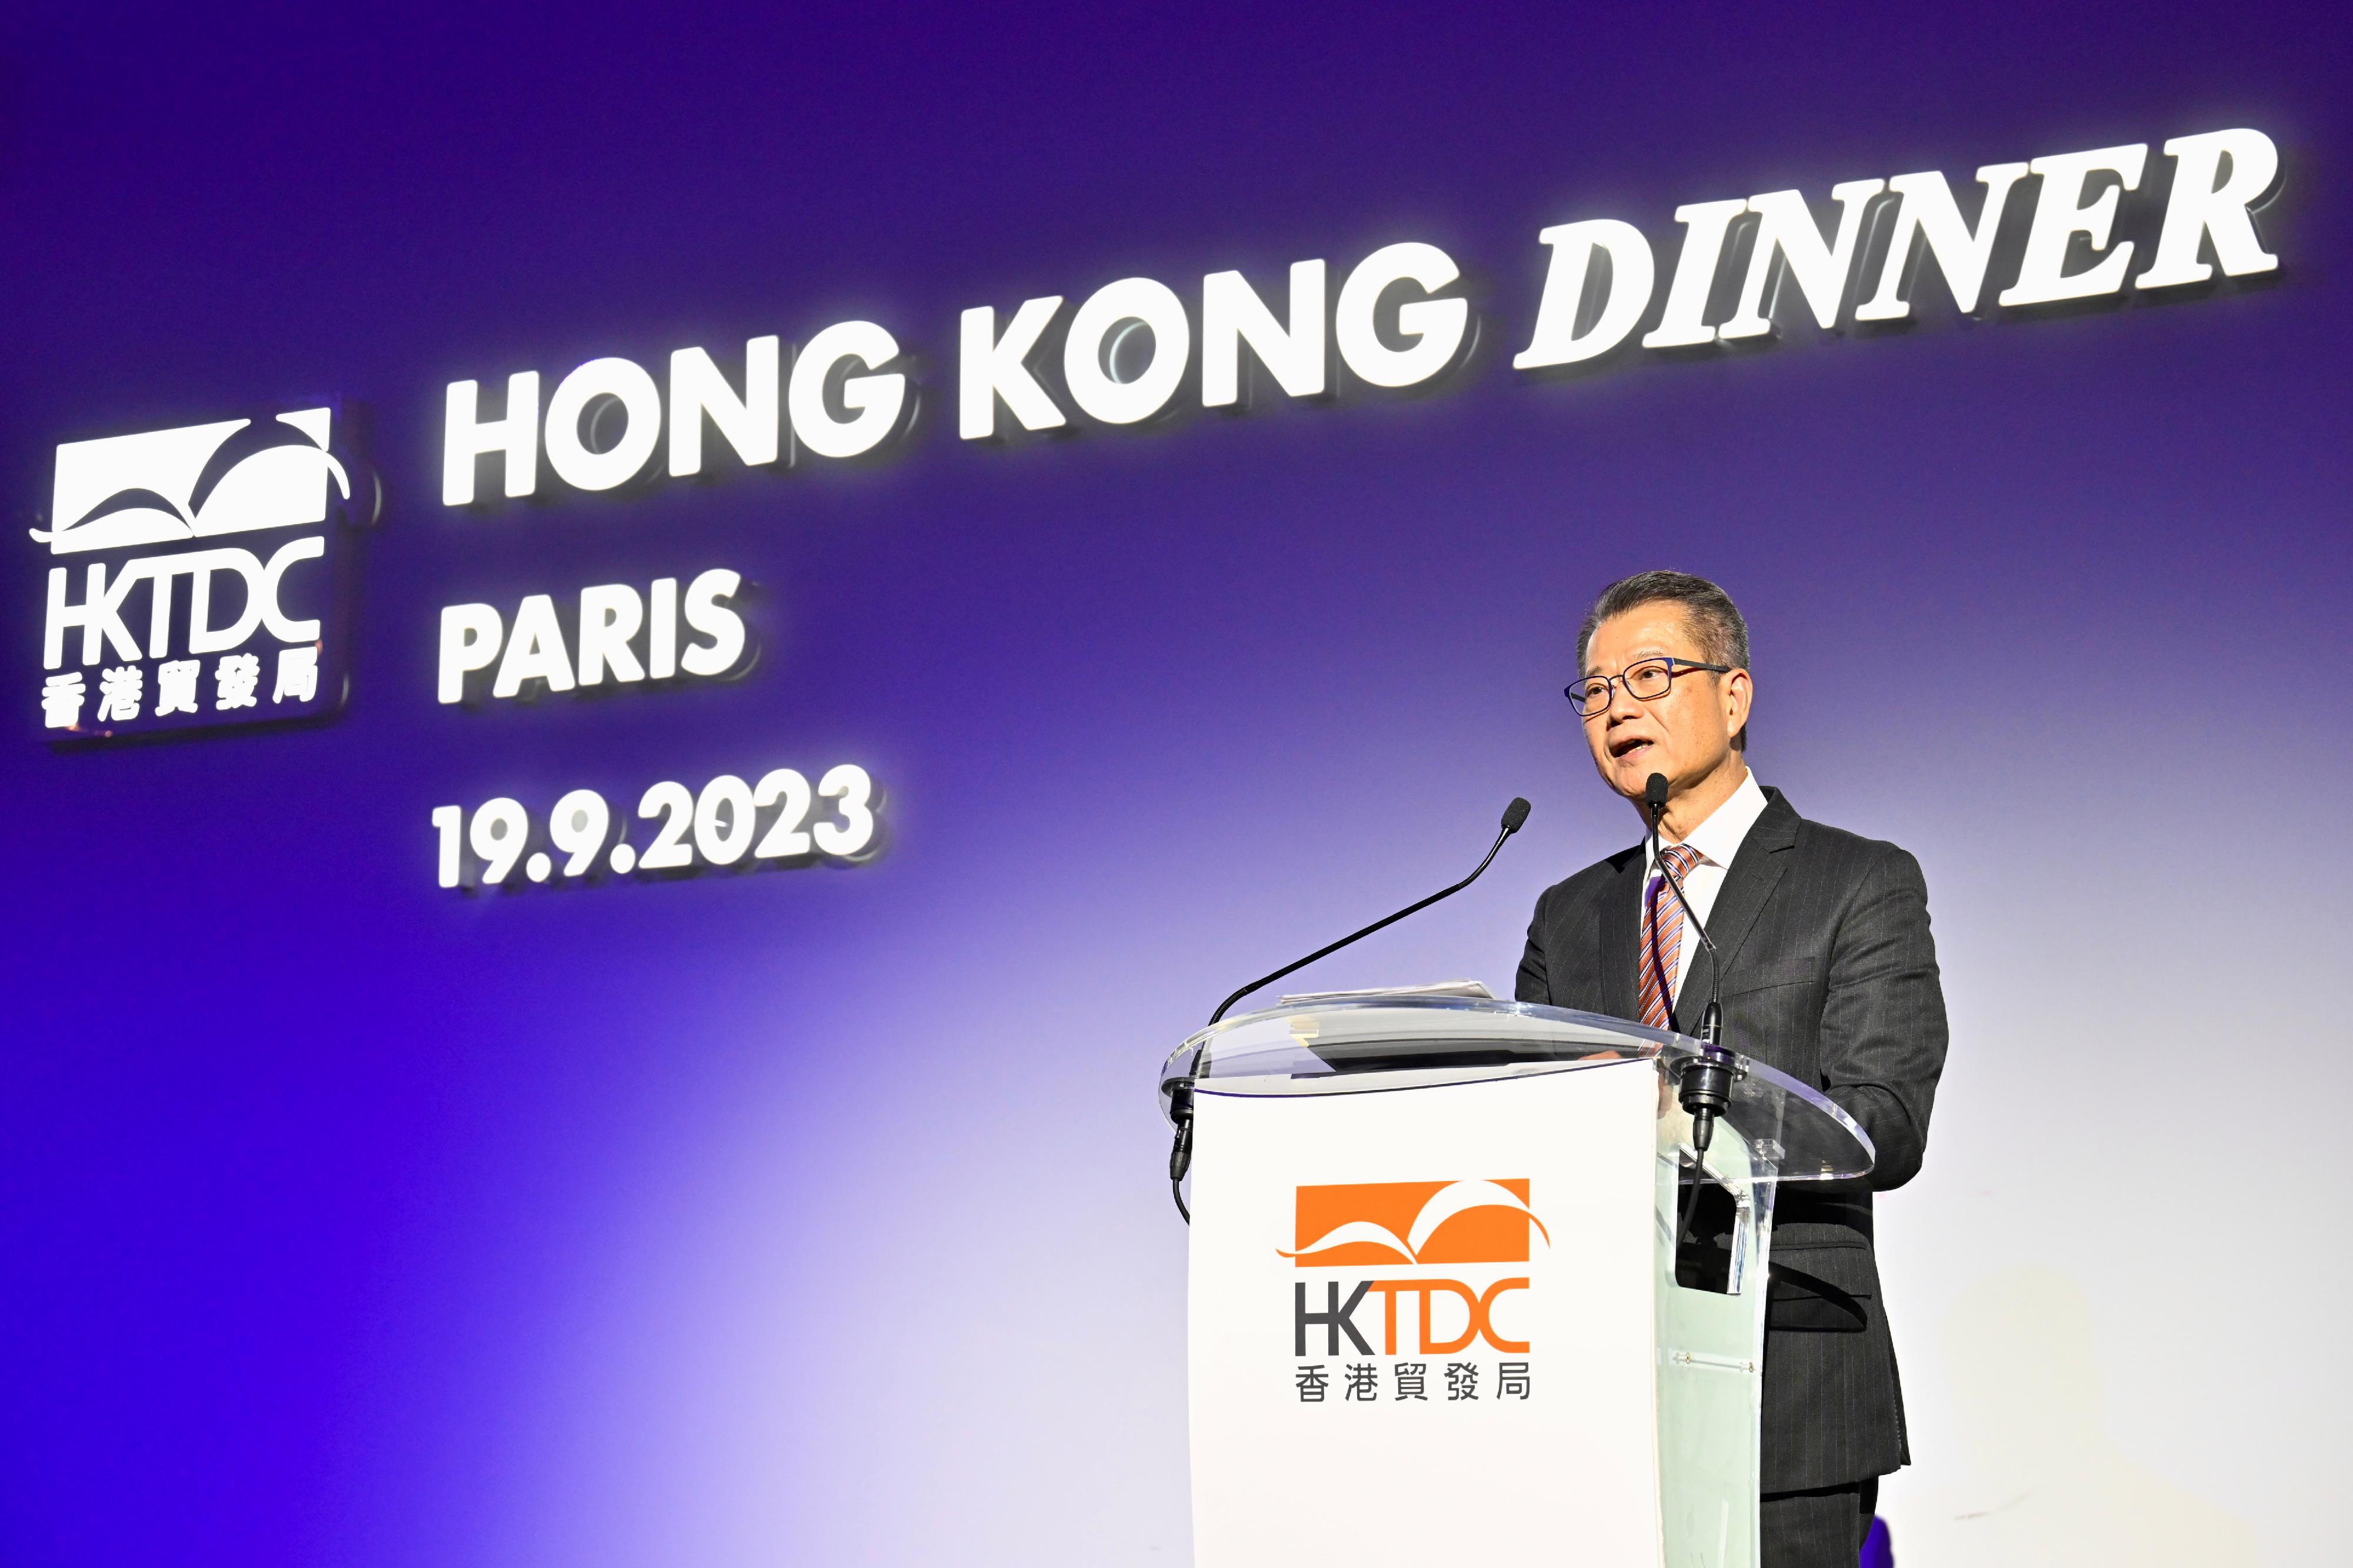 The Financial Secretary, Mr Paul Chan, continued to visit Paris, France, yesterday (September 19, Paris time). Photo shows Mr Chan speaking at the Hong Kong Dinner in Paris organised by the Hong Kong Trade Development Council.